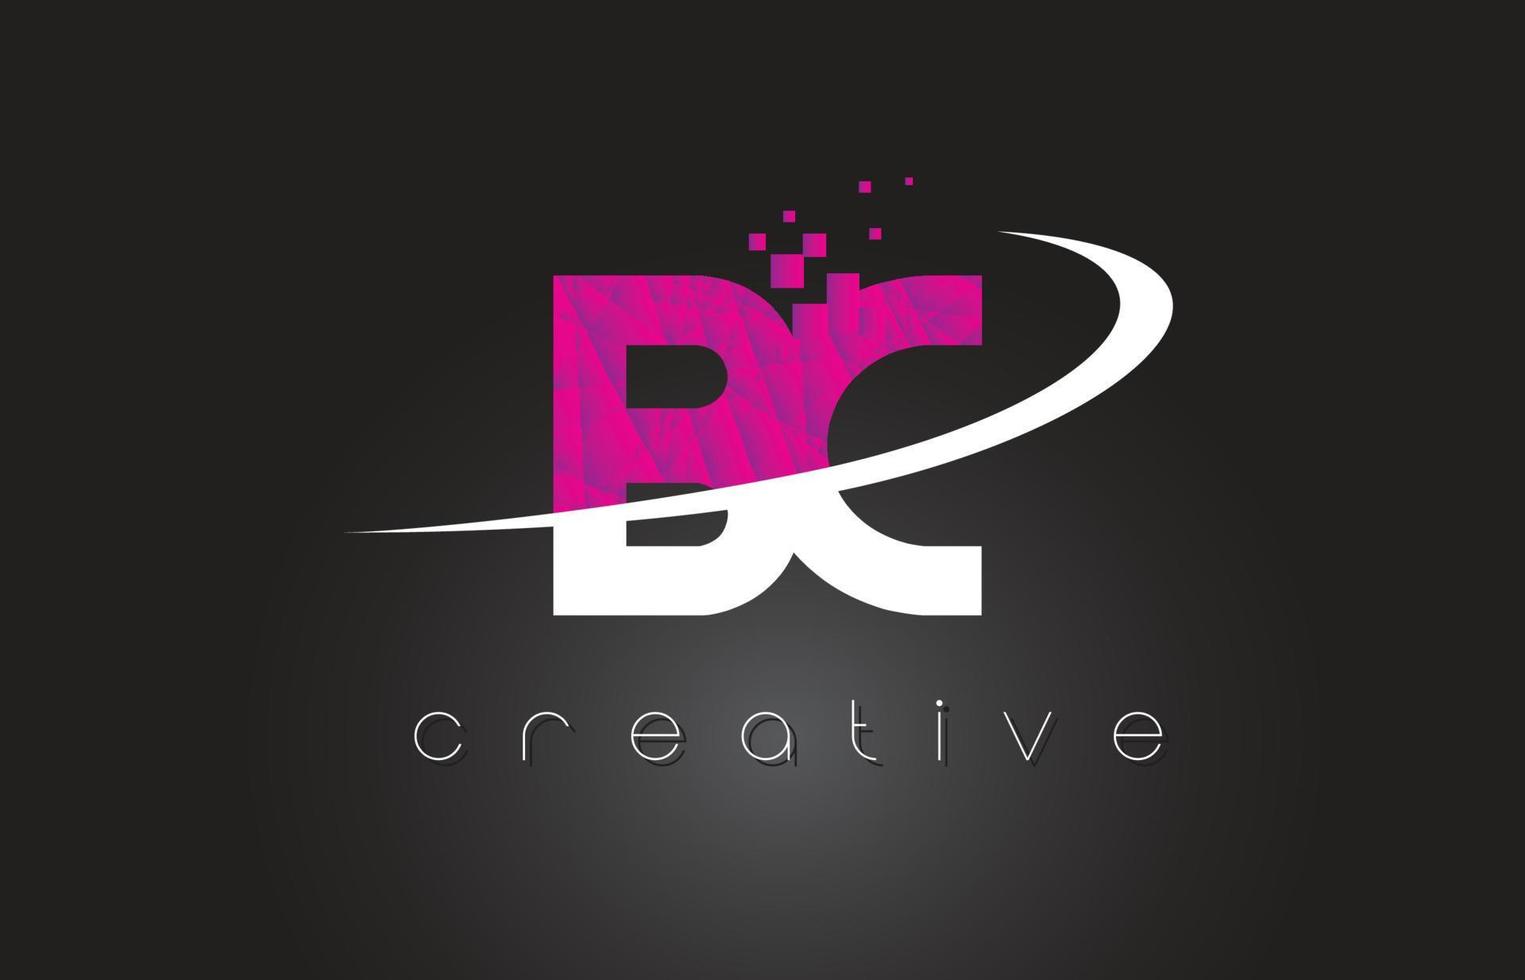 BC B C Creative Letters Design With White Pink Colors vector